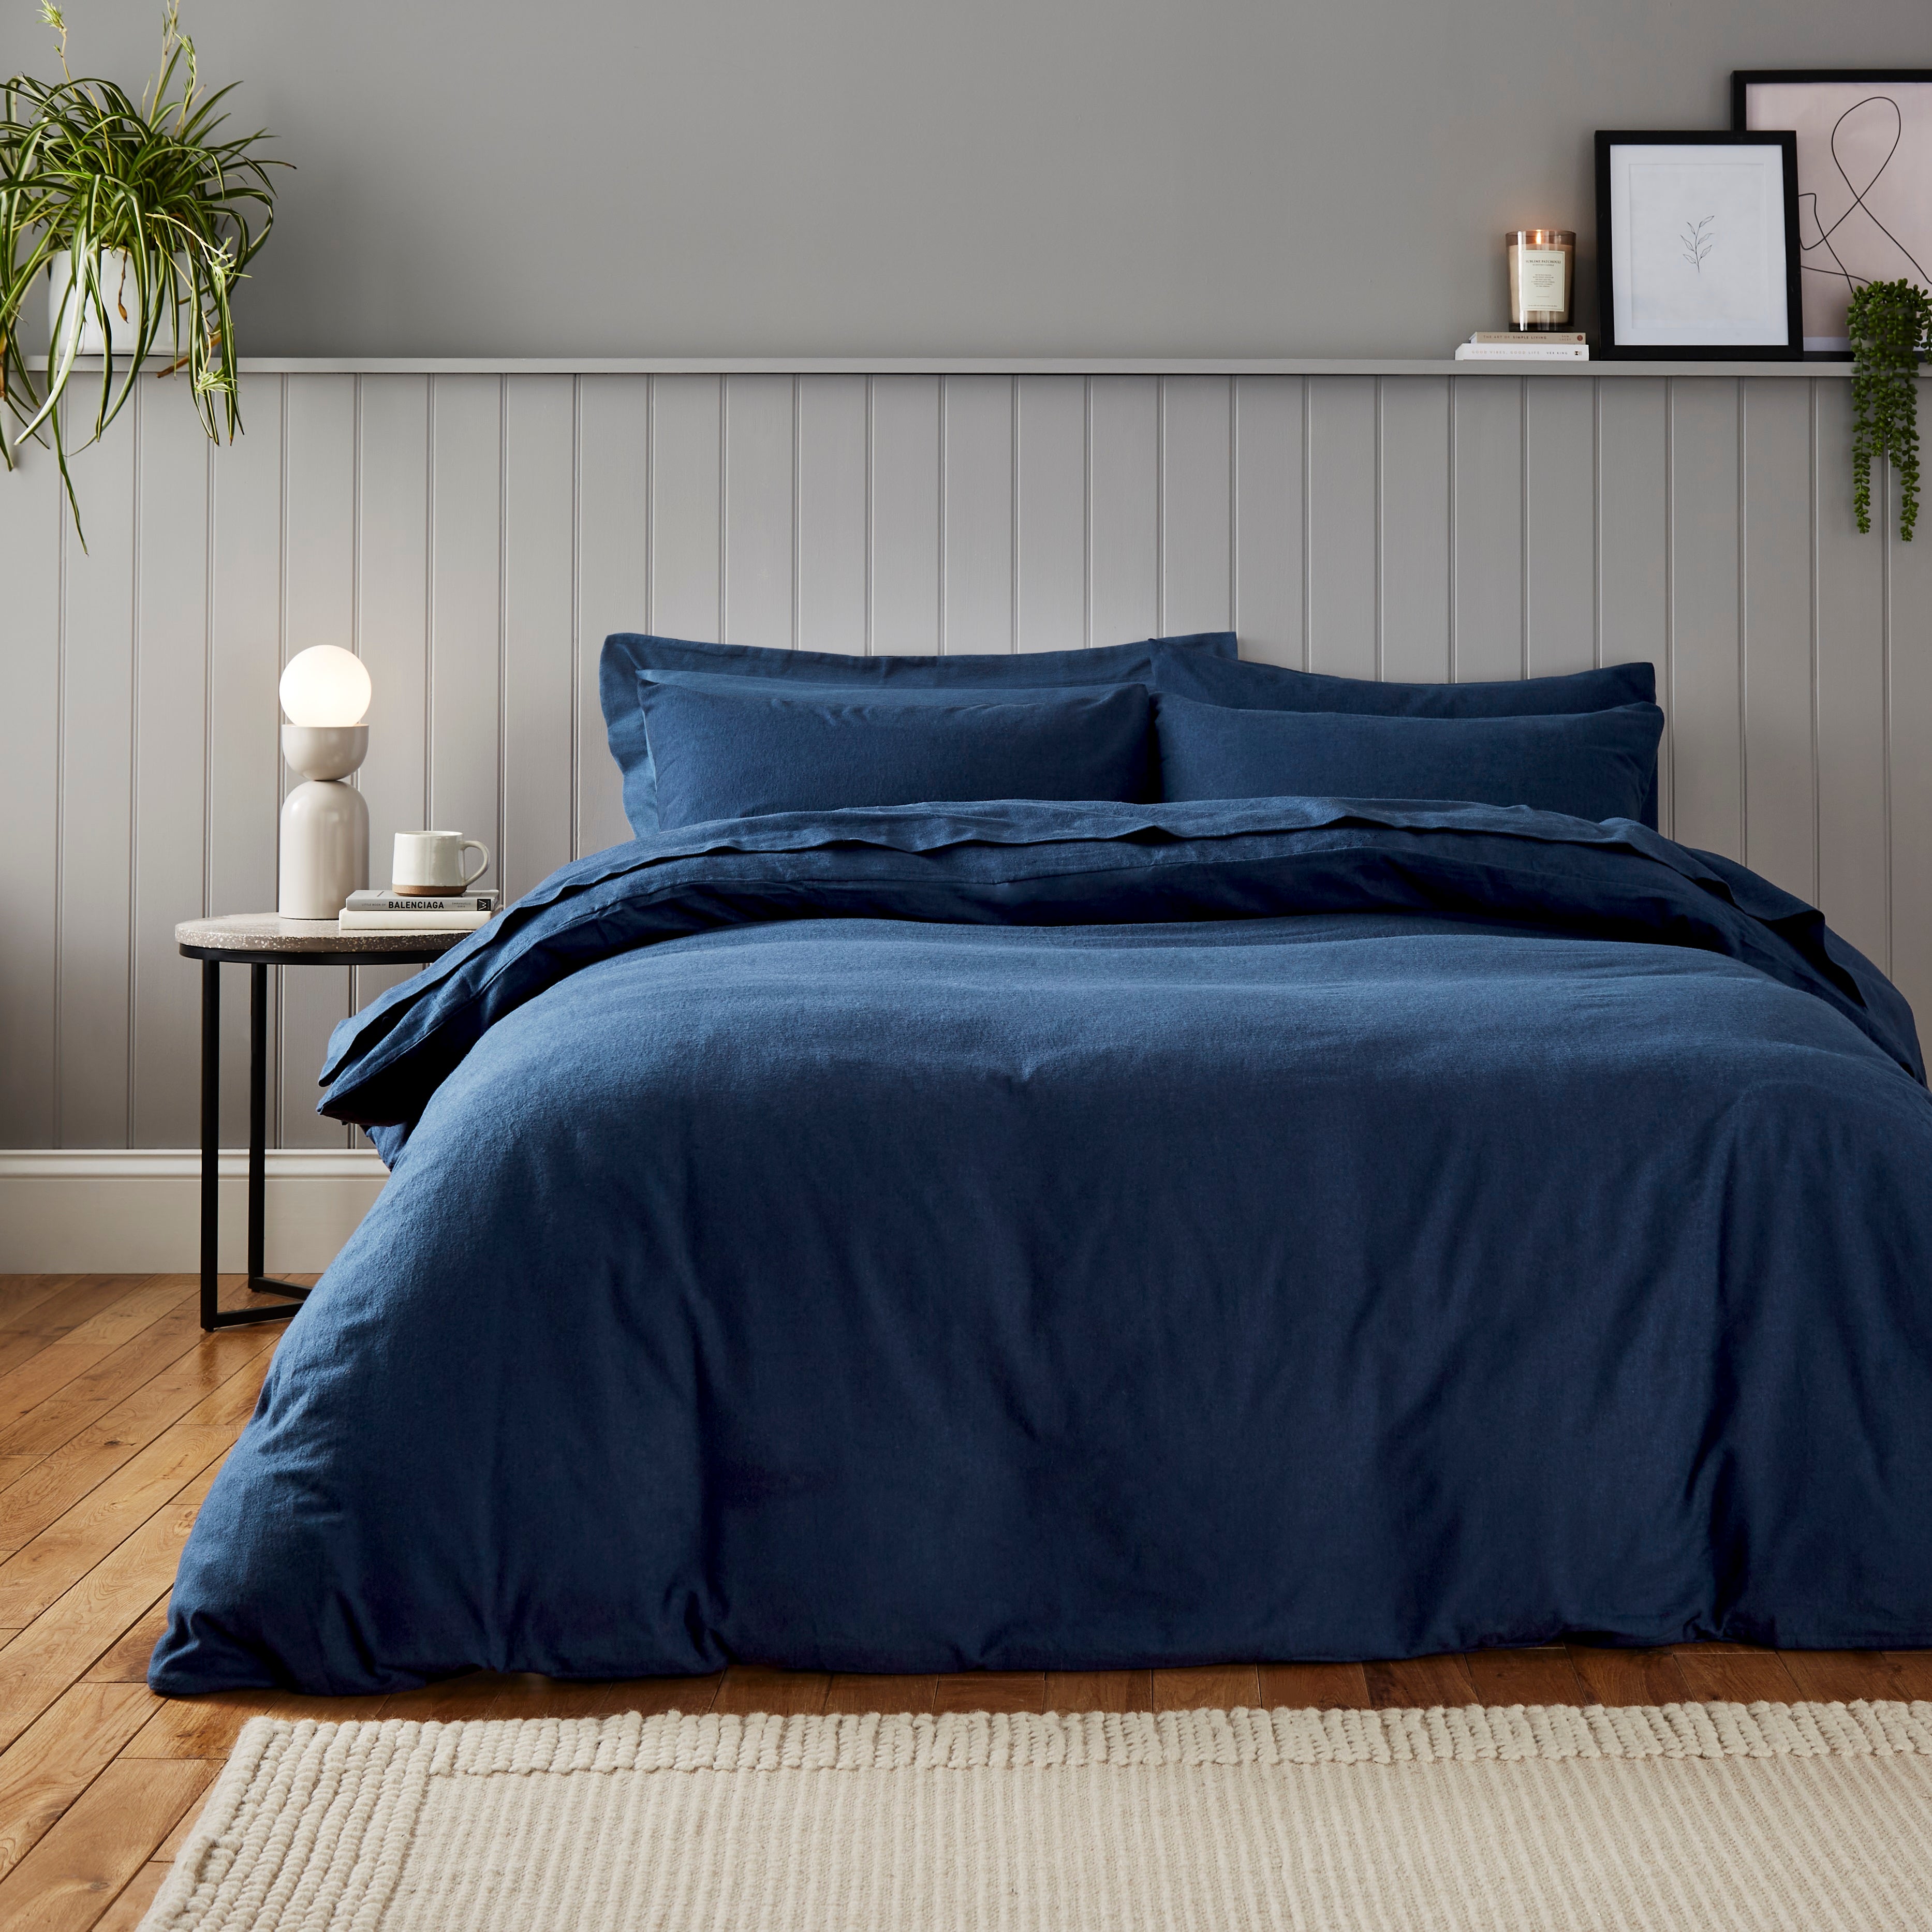 Soft Cosy Luxury Brushed Cotton Navy Duvet Cover And Pillowcase Set Navy Blue